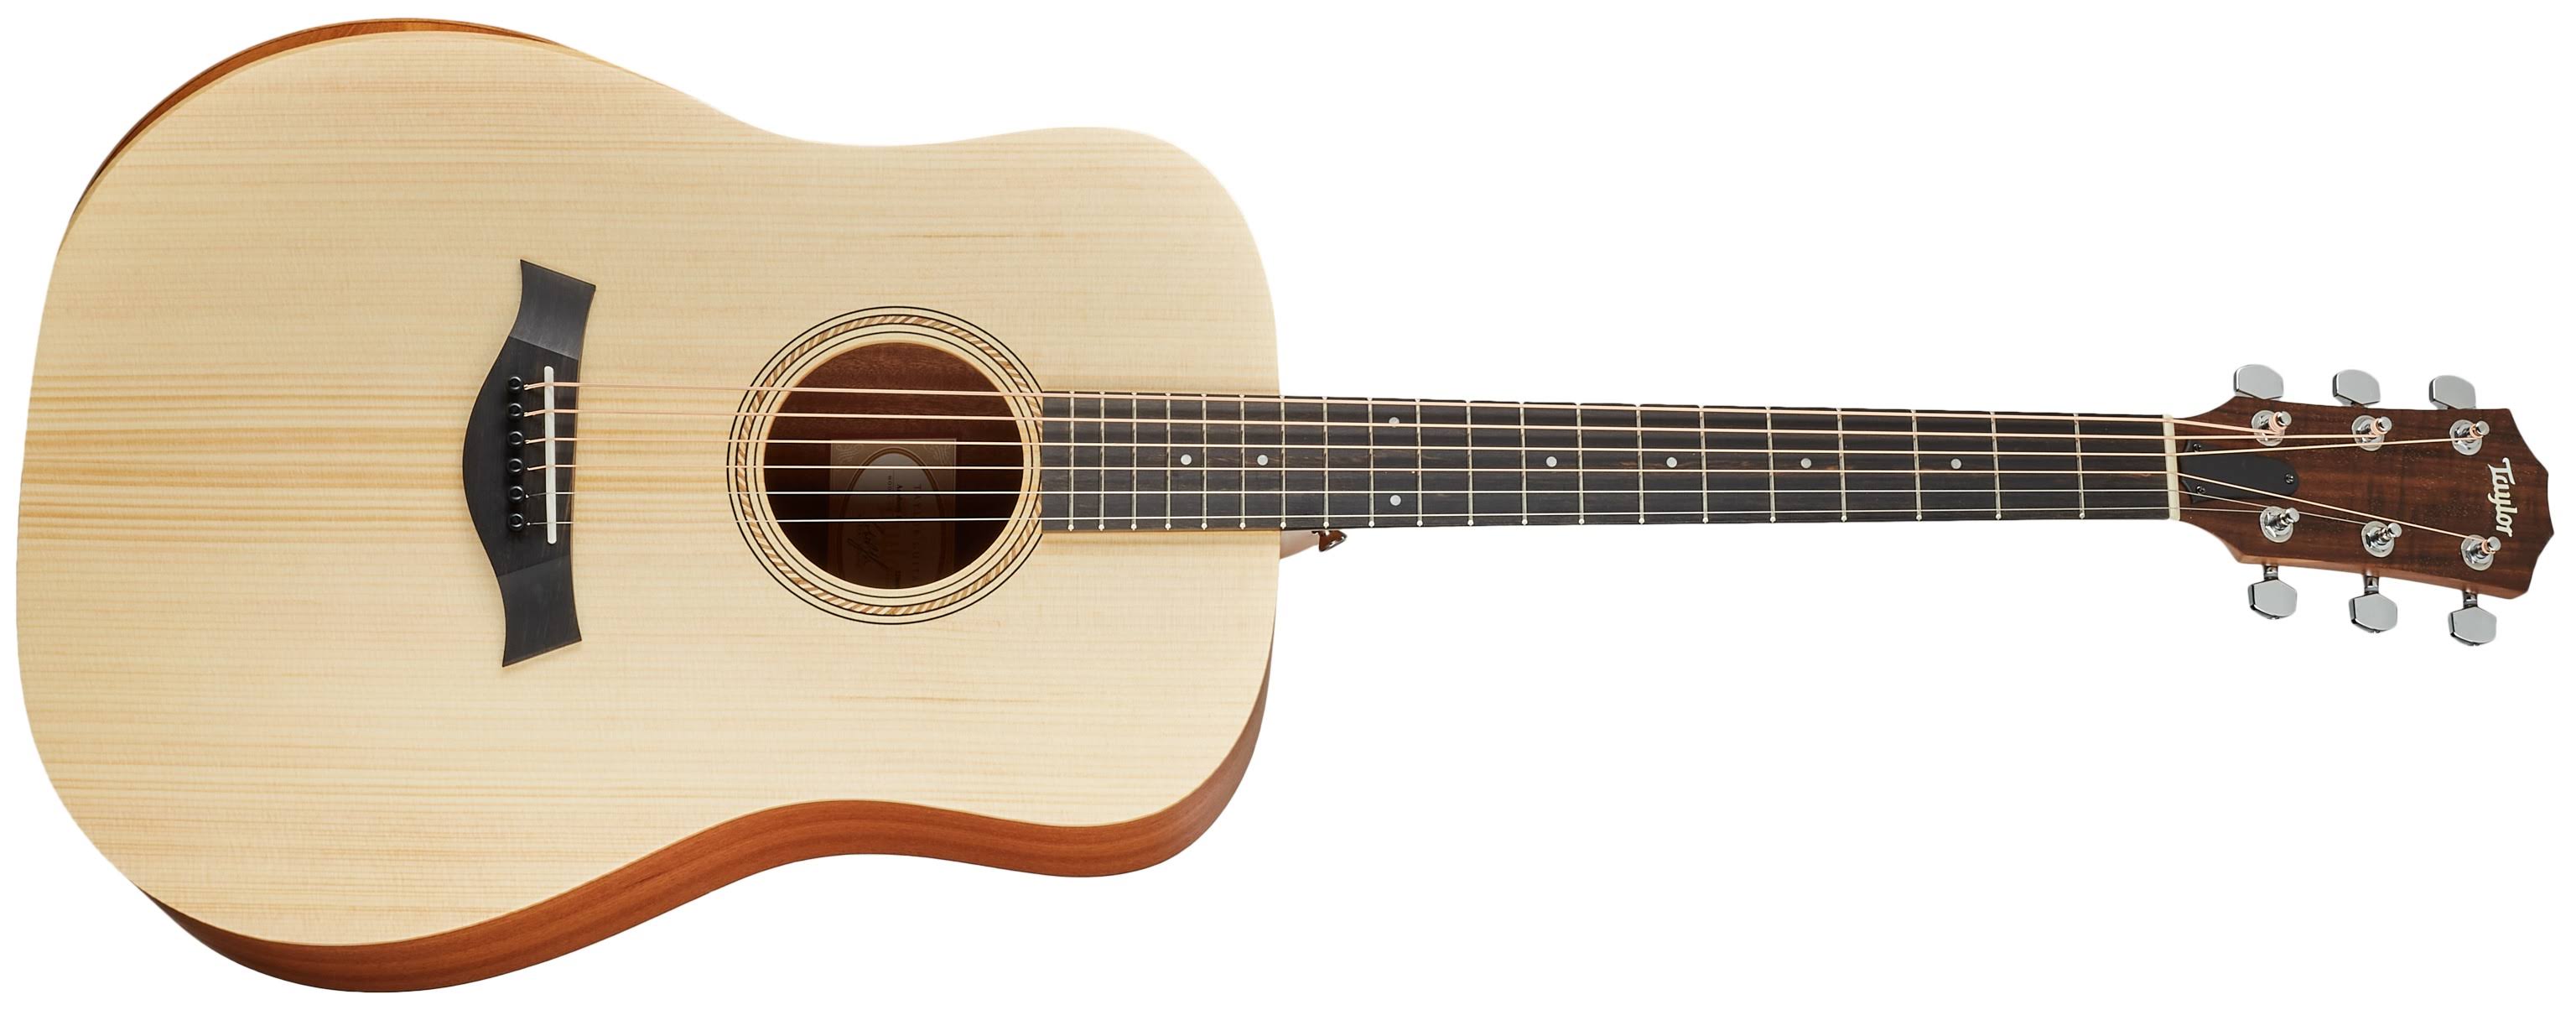 Taylor Academy 10 Dreadnought Acoustic